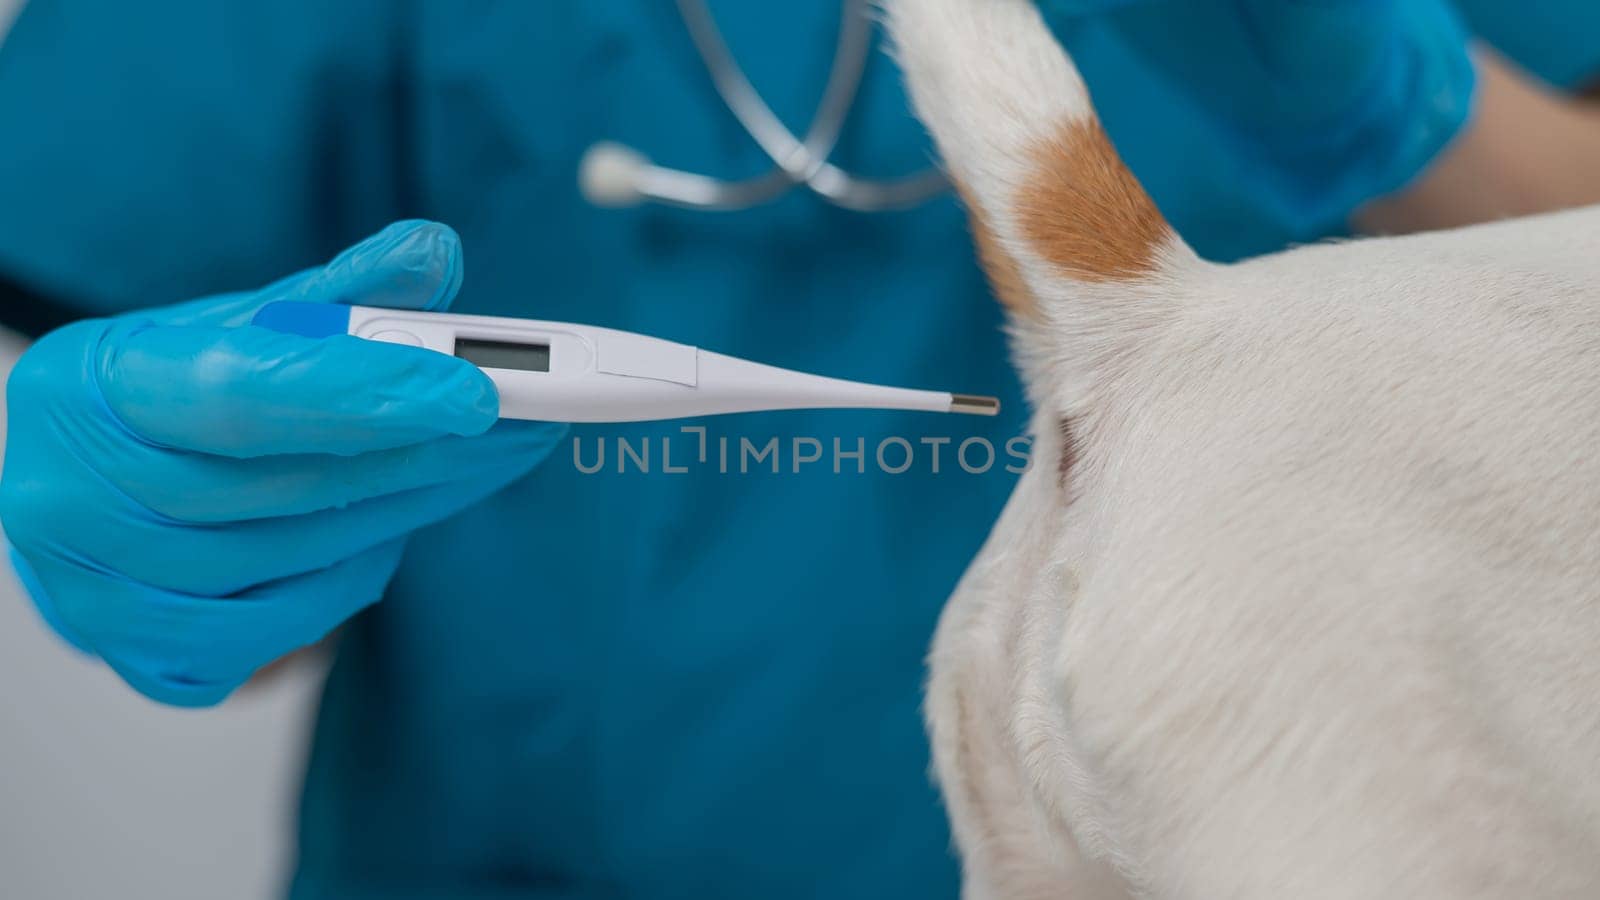 A veterinarian measures a dog's temperature rectally with an electronic thermometer